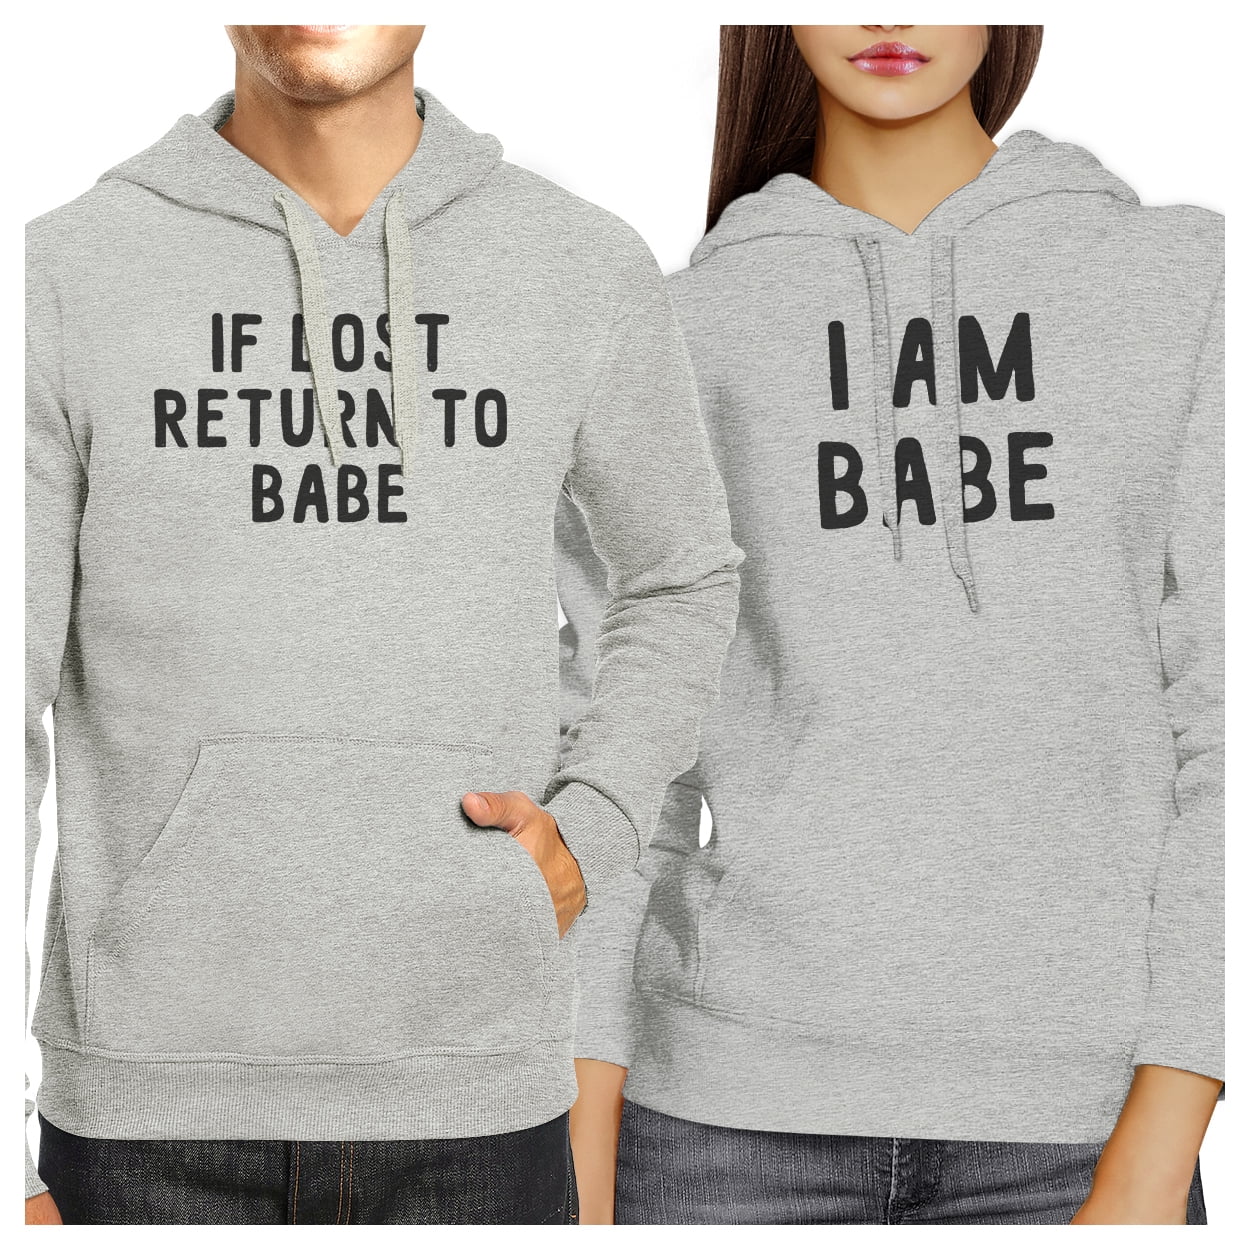 IF I LOST RETURN TO BABE Couple Matching HOODIES TOGETHER SINCE For Him and Her 